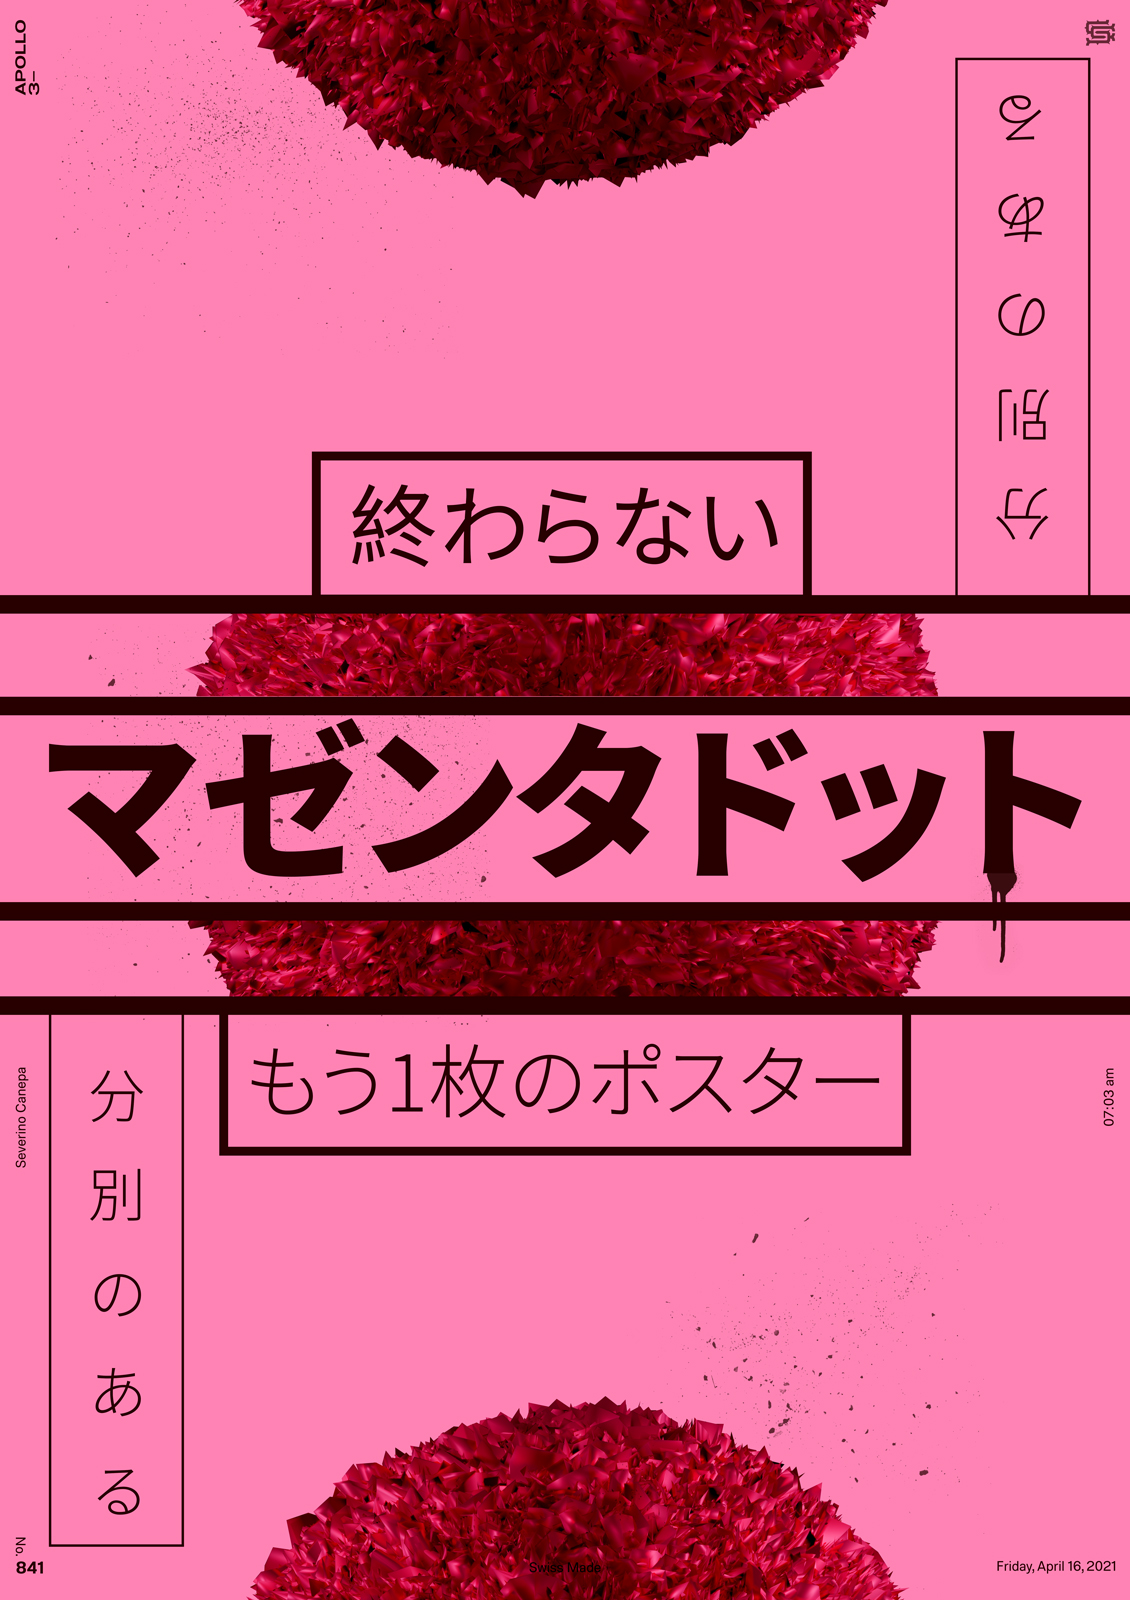 Visual creation made in a fake magenta color and Japnese font